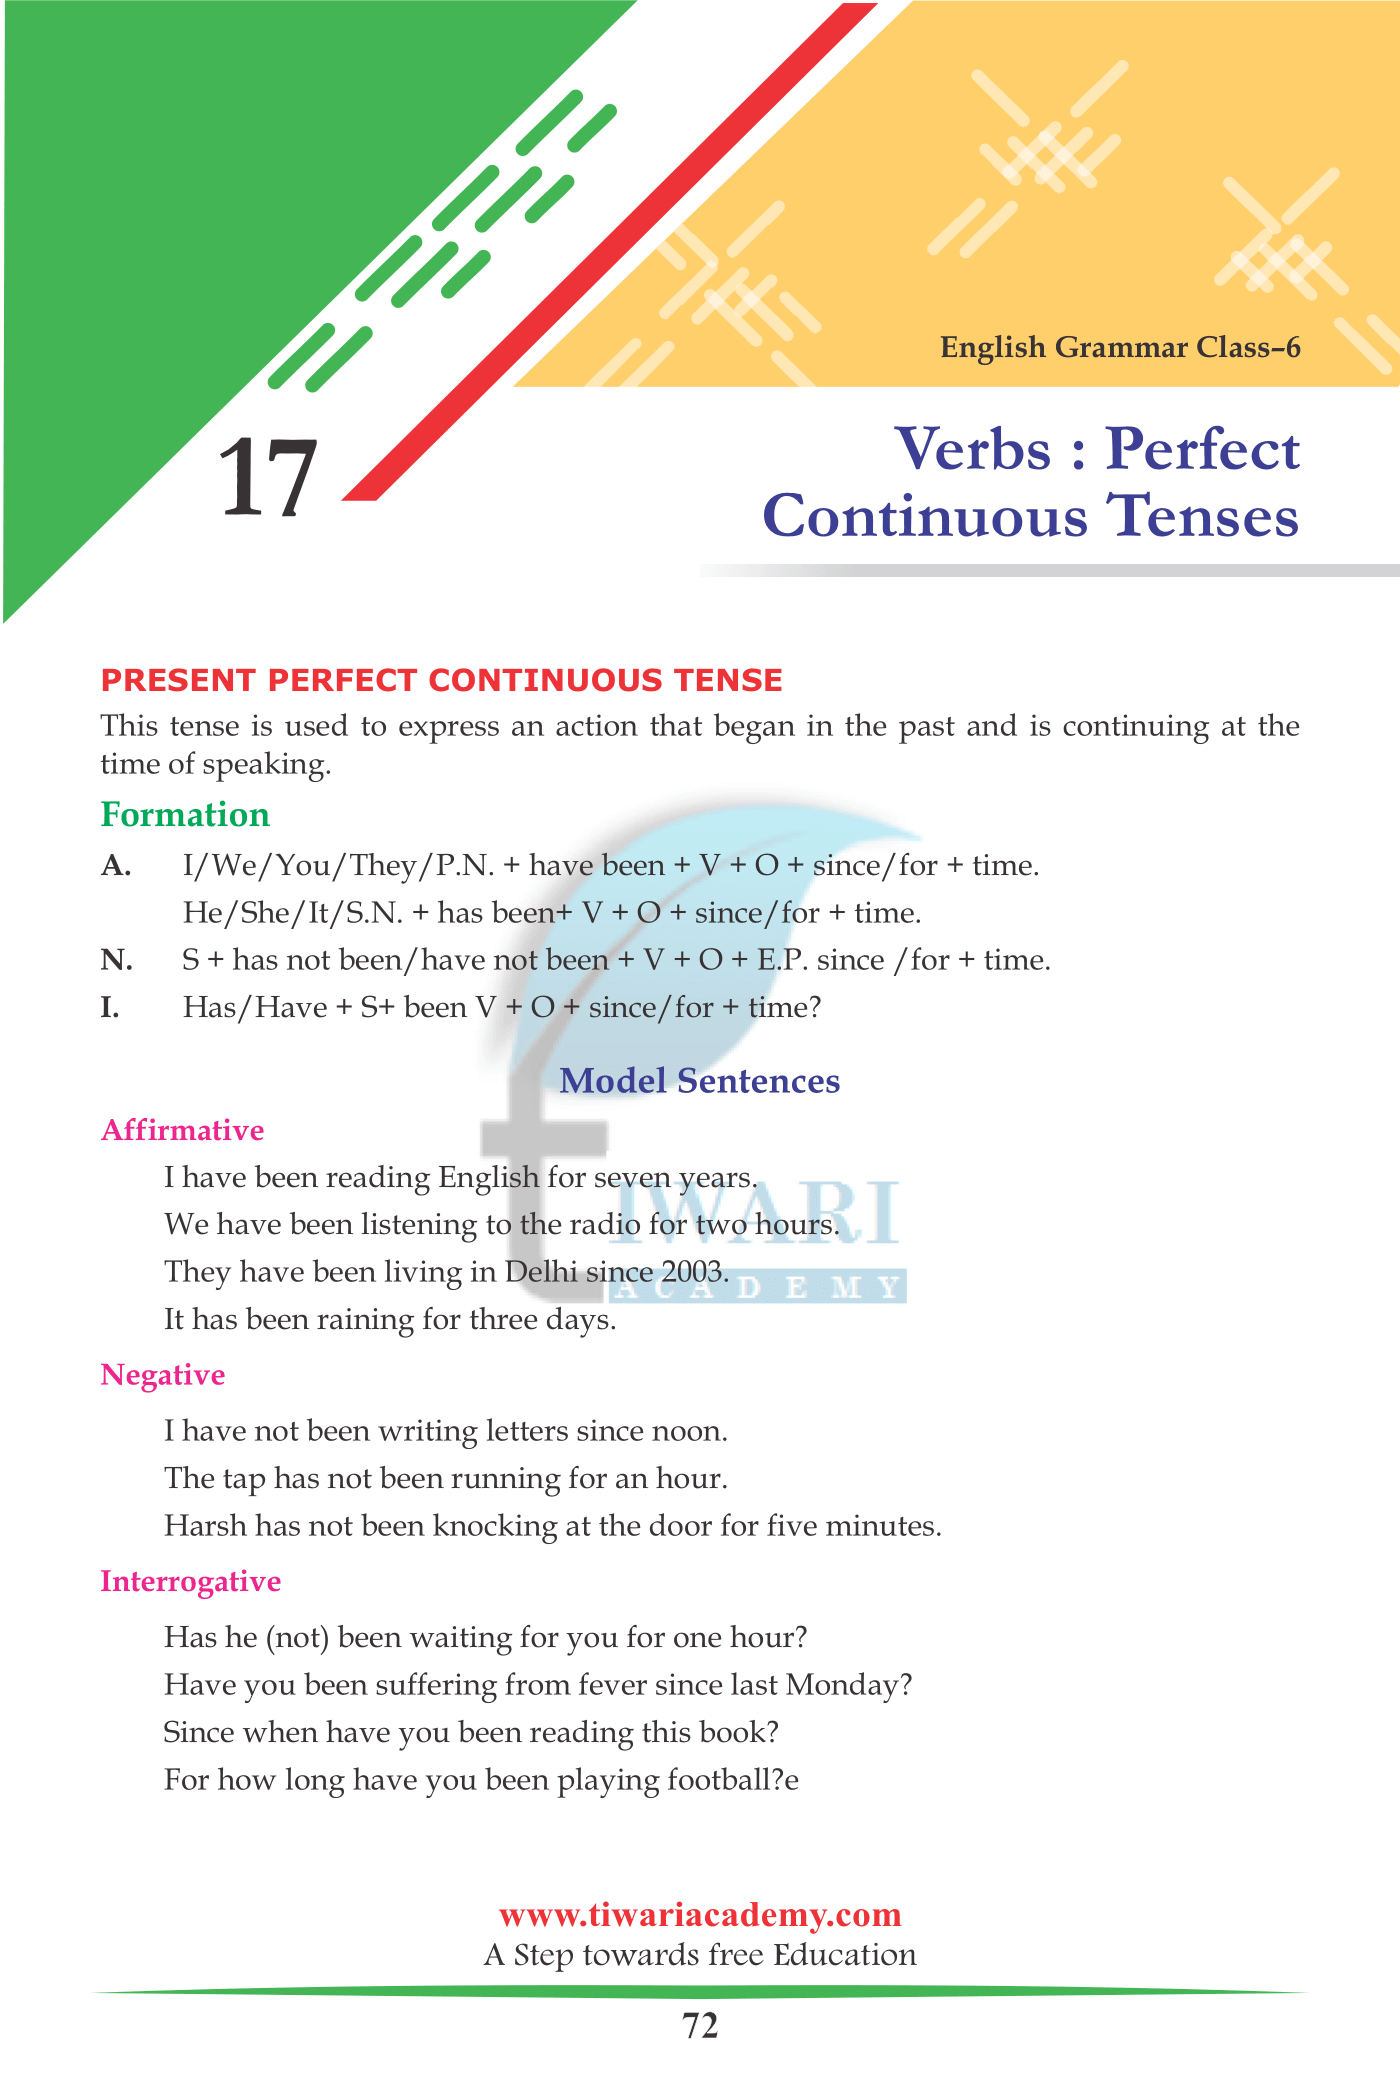 Class 6 English Grammar Chapter 17 Verbs – Perfect Continuous Tense